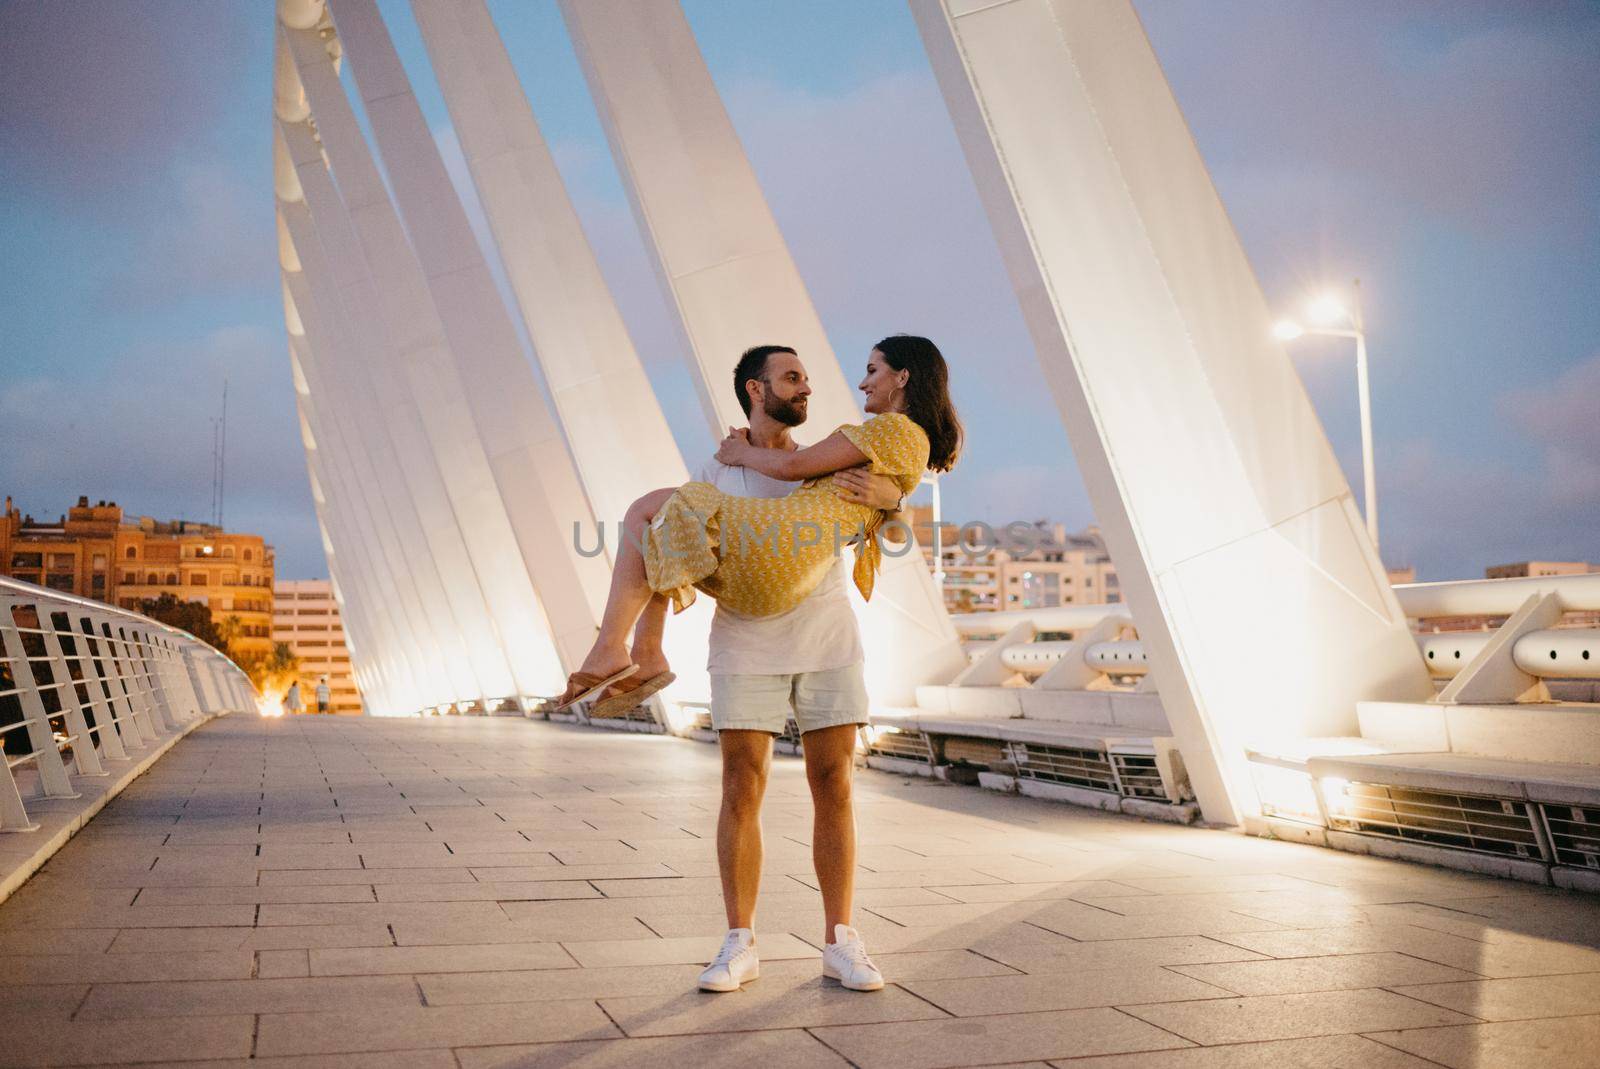 A man with a beard is holding his girl in a yellow dress in his arms in Valencia by RomanJRoyce